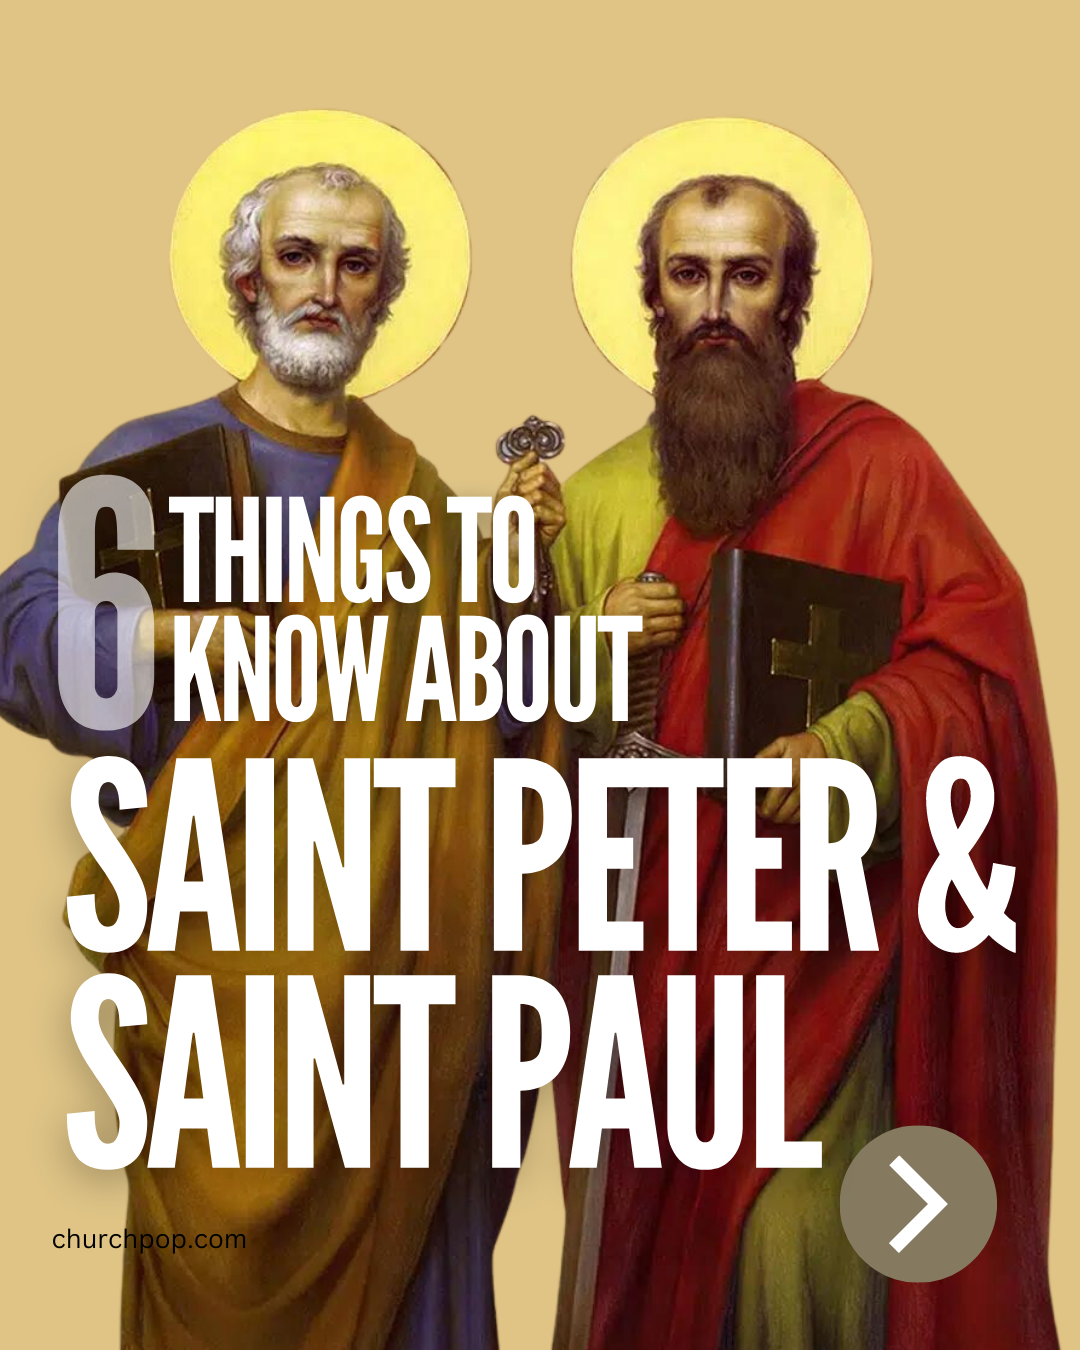 Who are St. Peter and Paul?